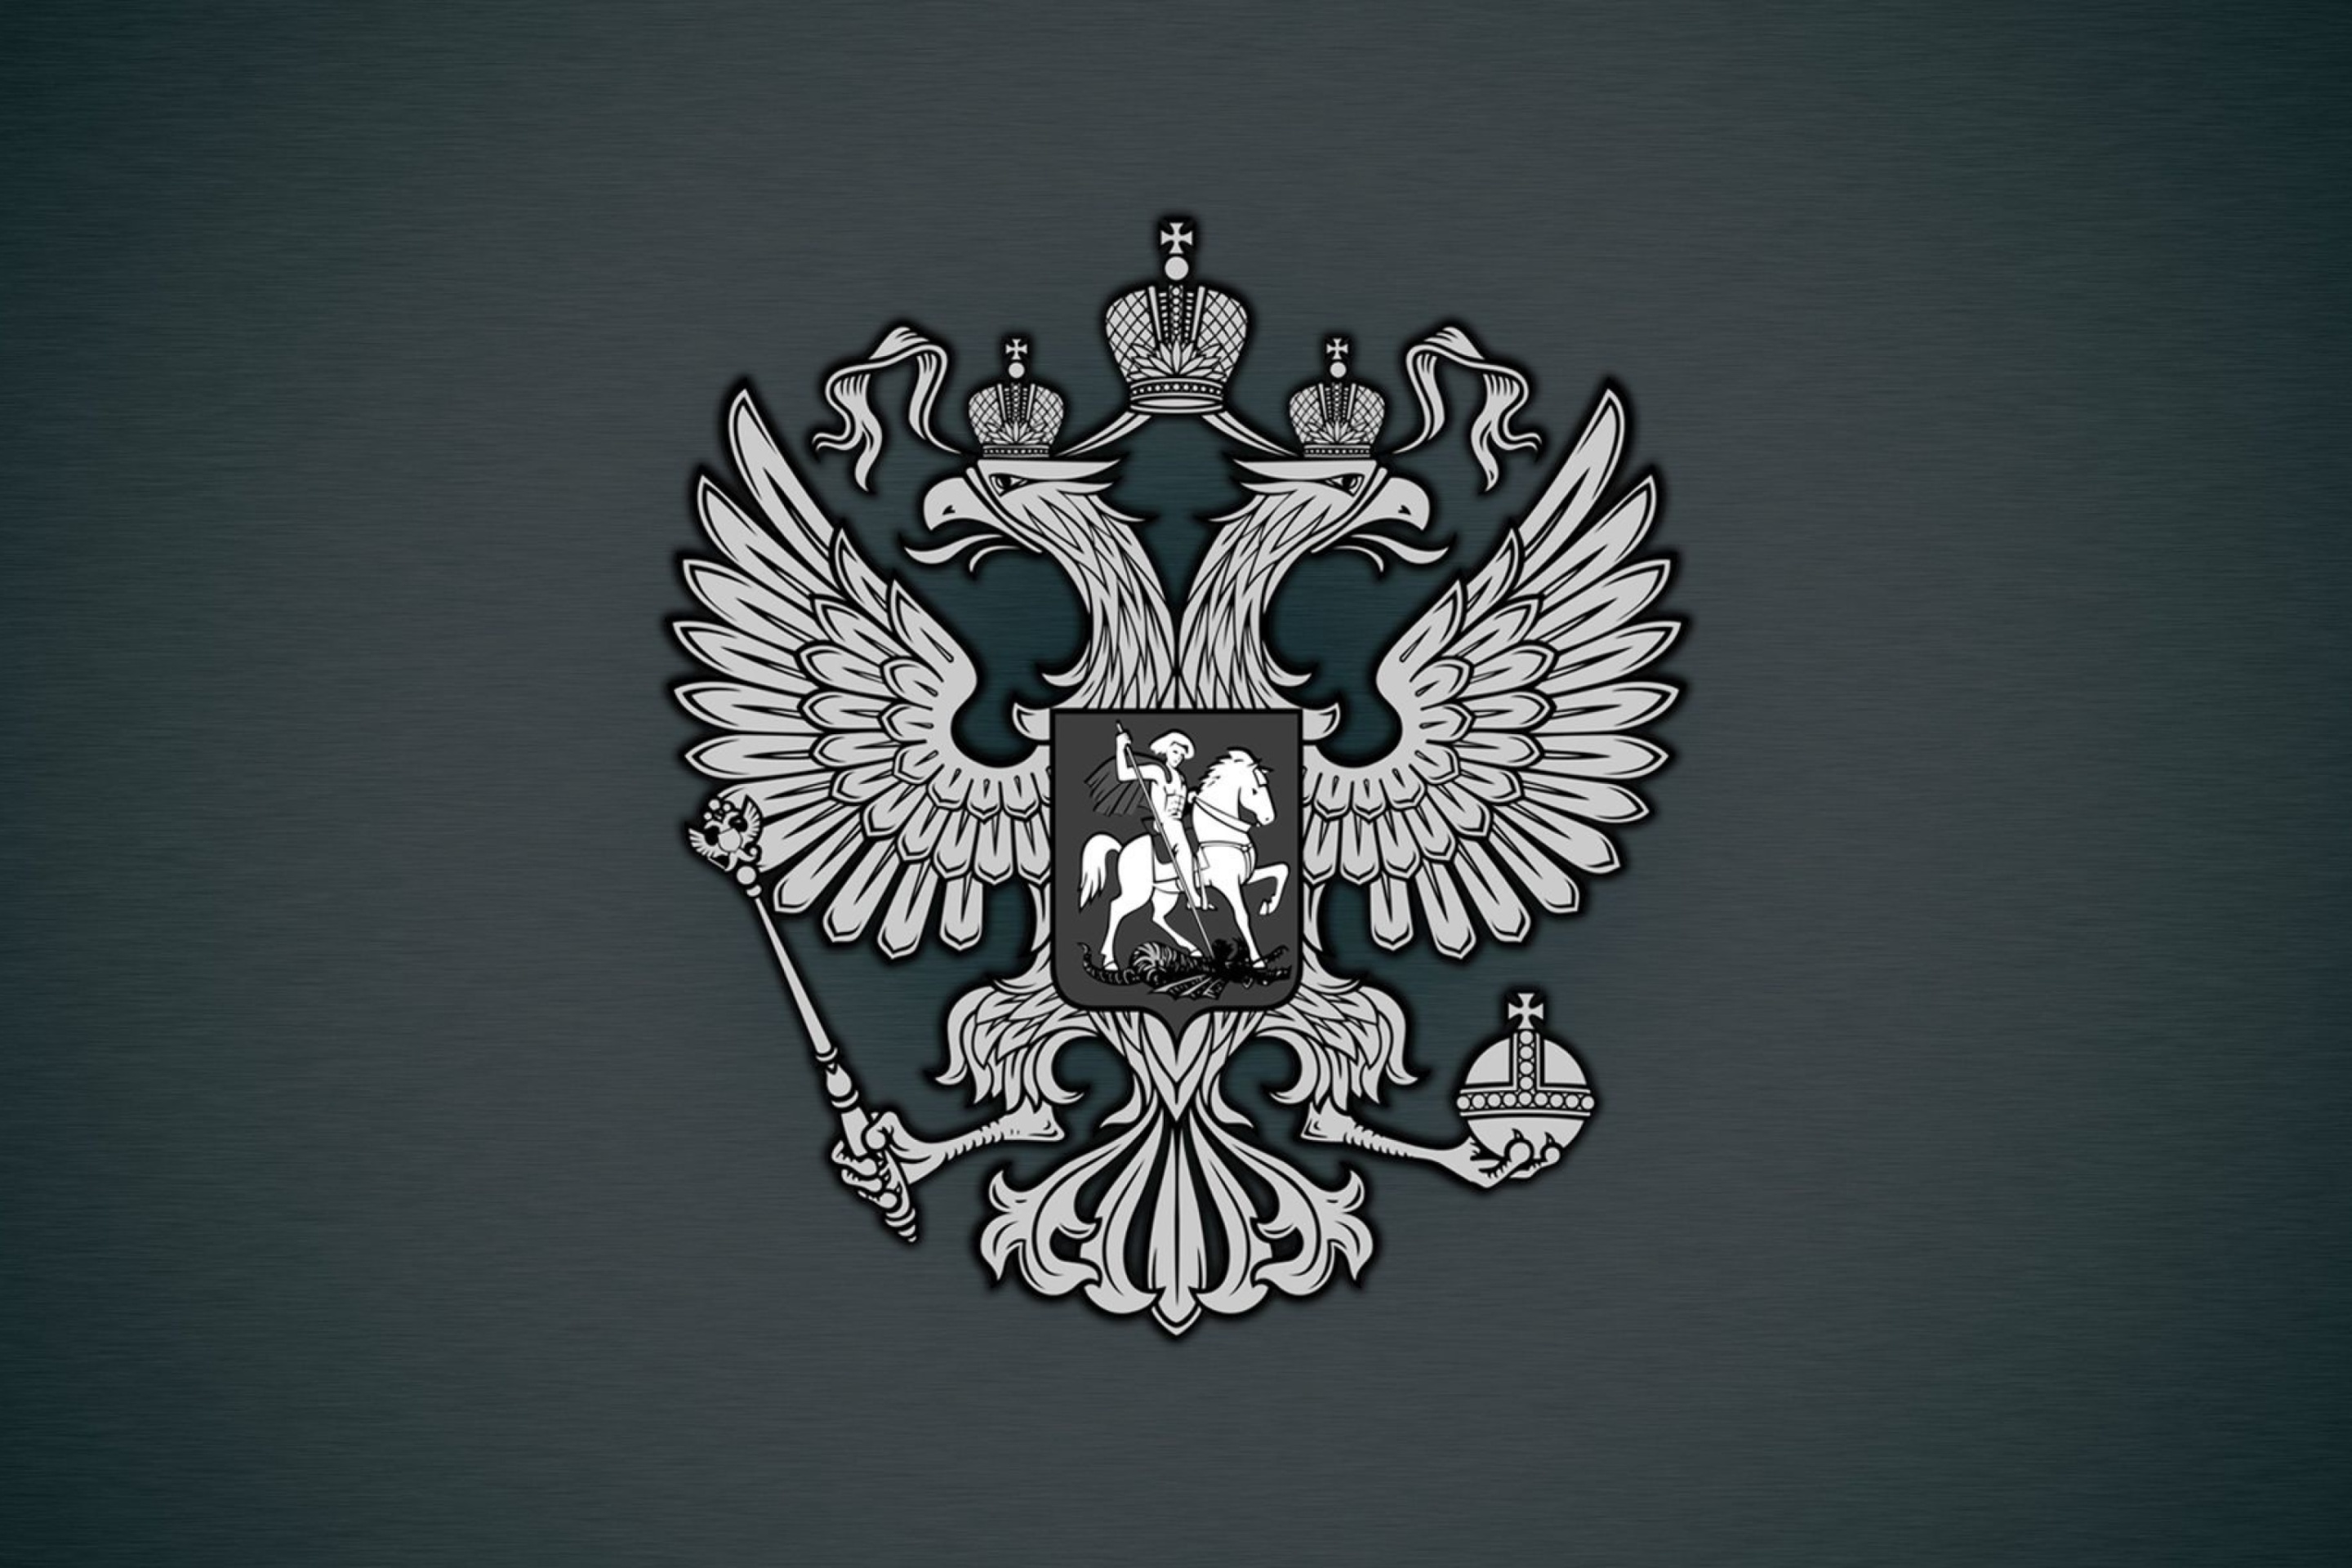 Coat of arms of Russia wallpaper 2880x1920